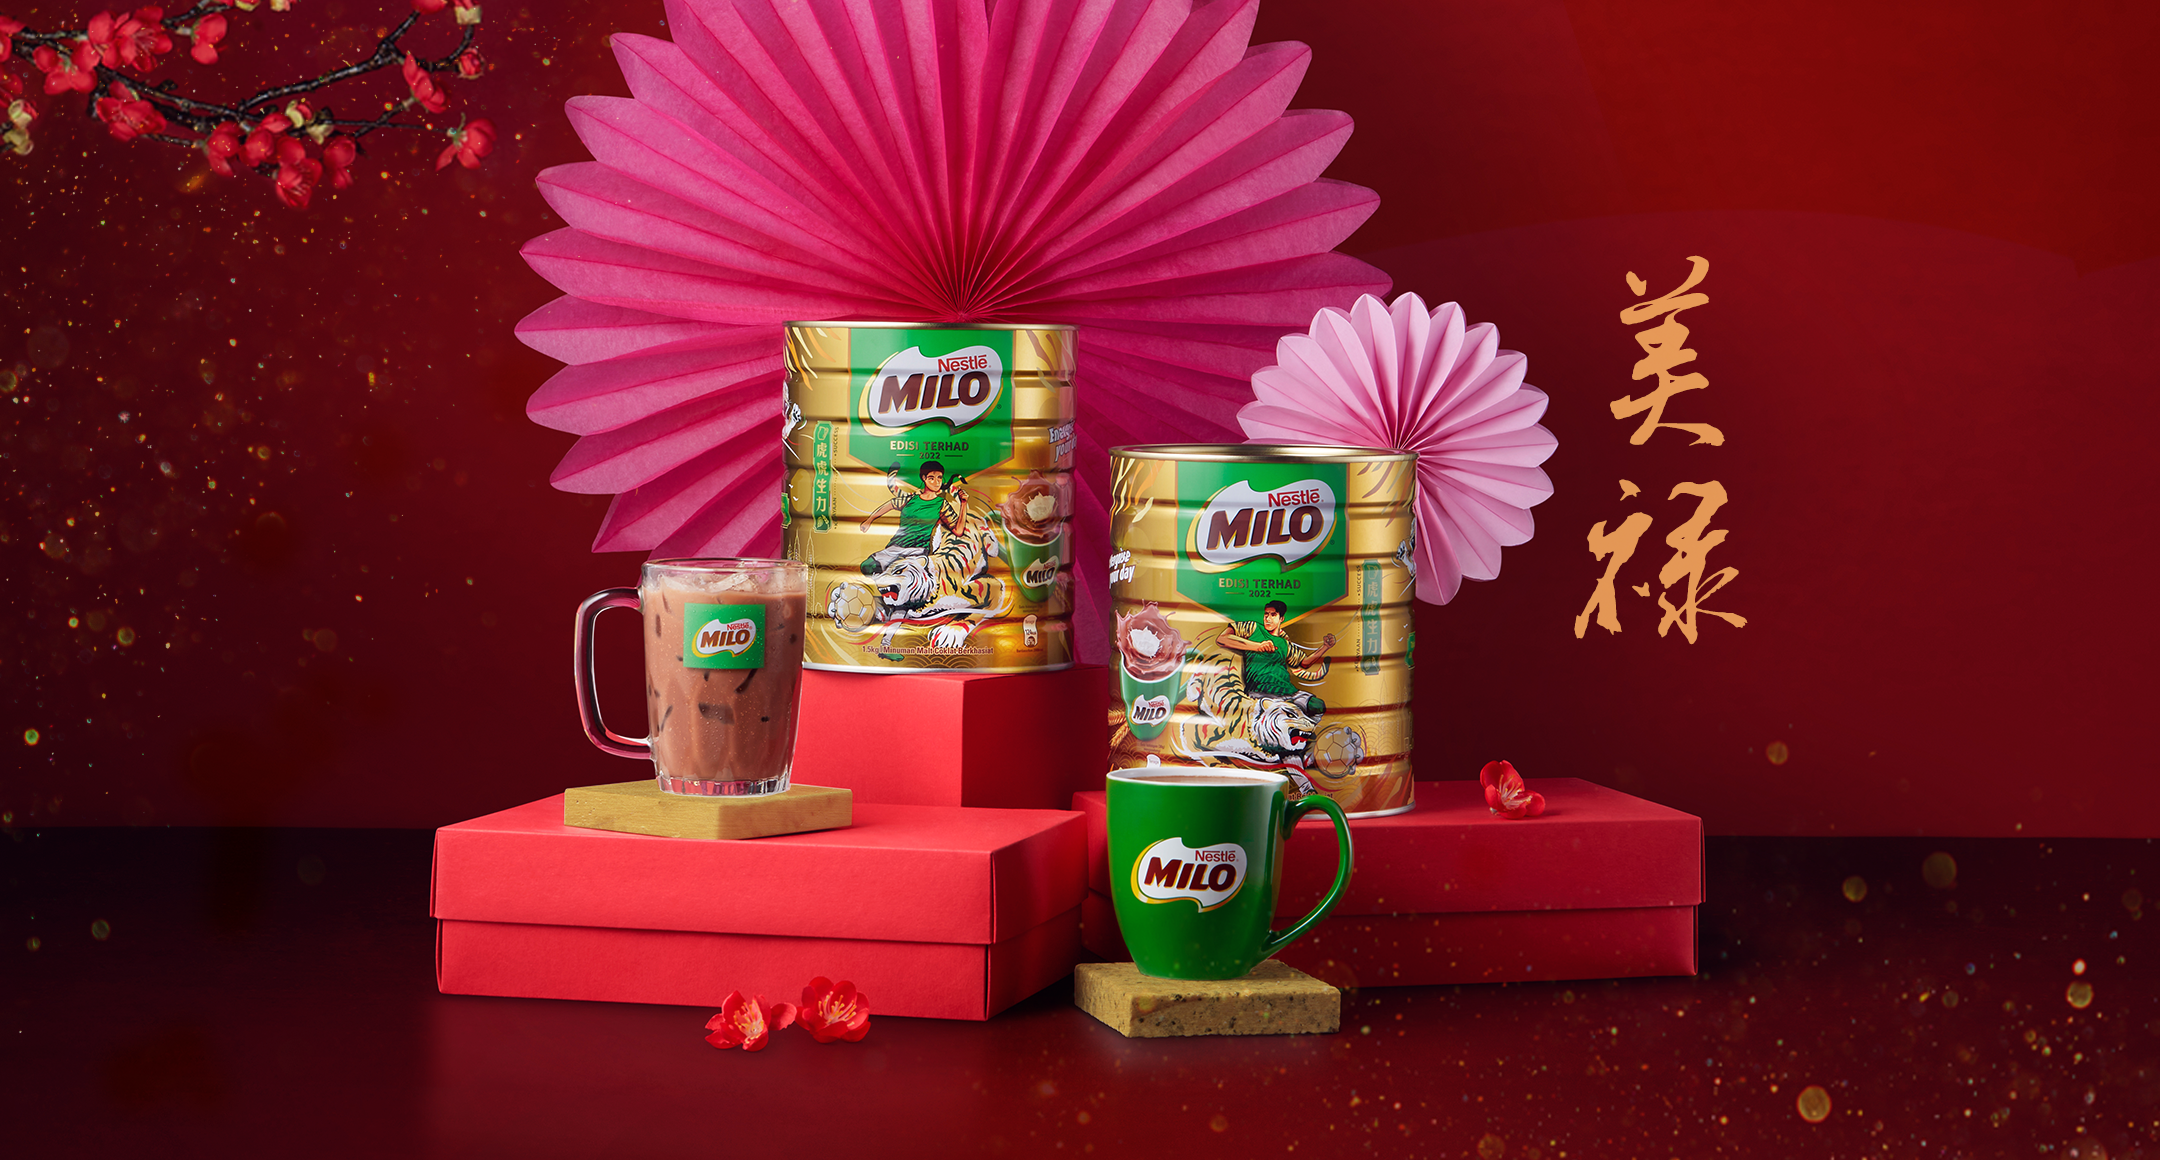 The Limited Edition MILO® Gold Tins